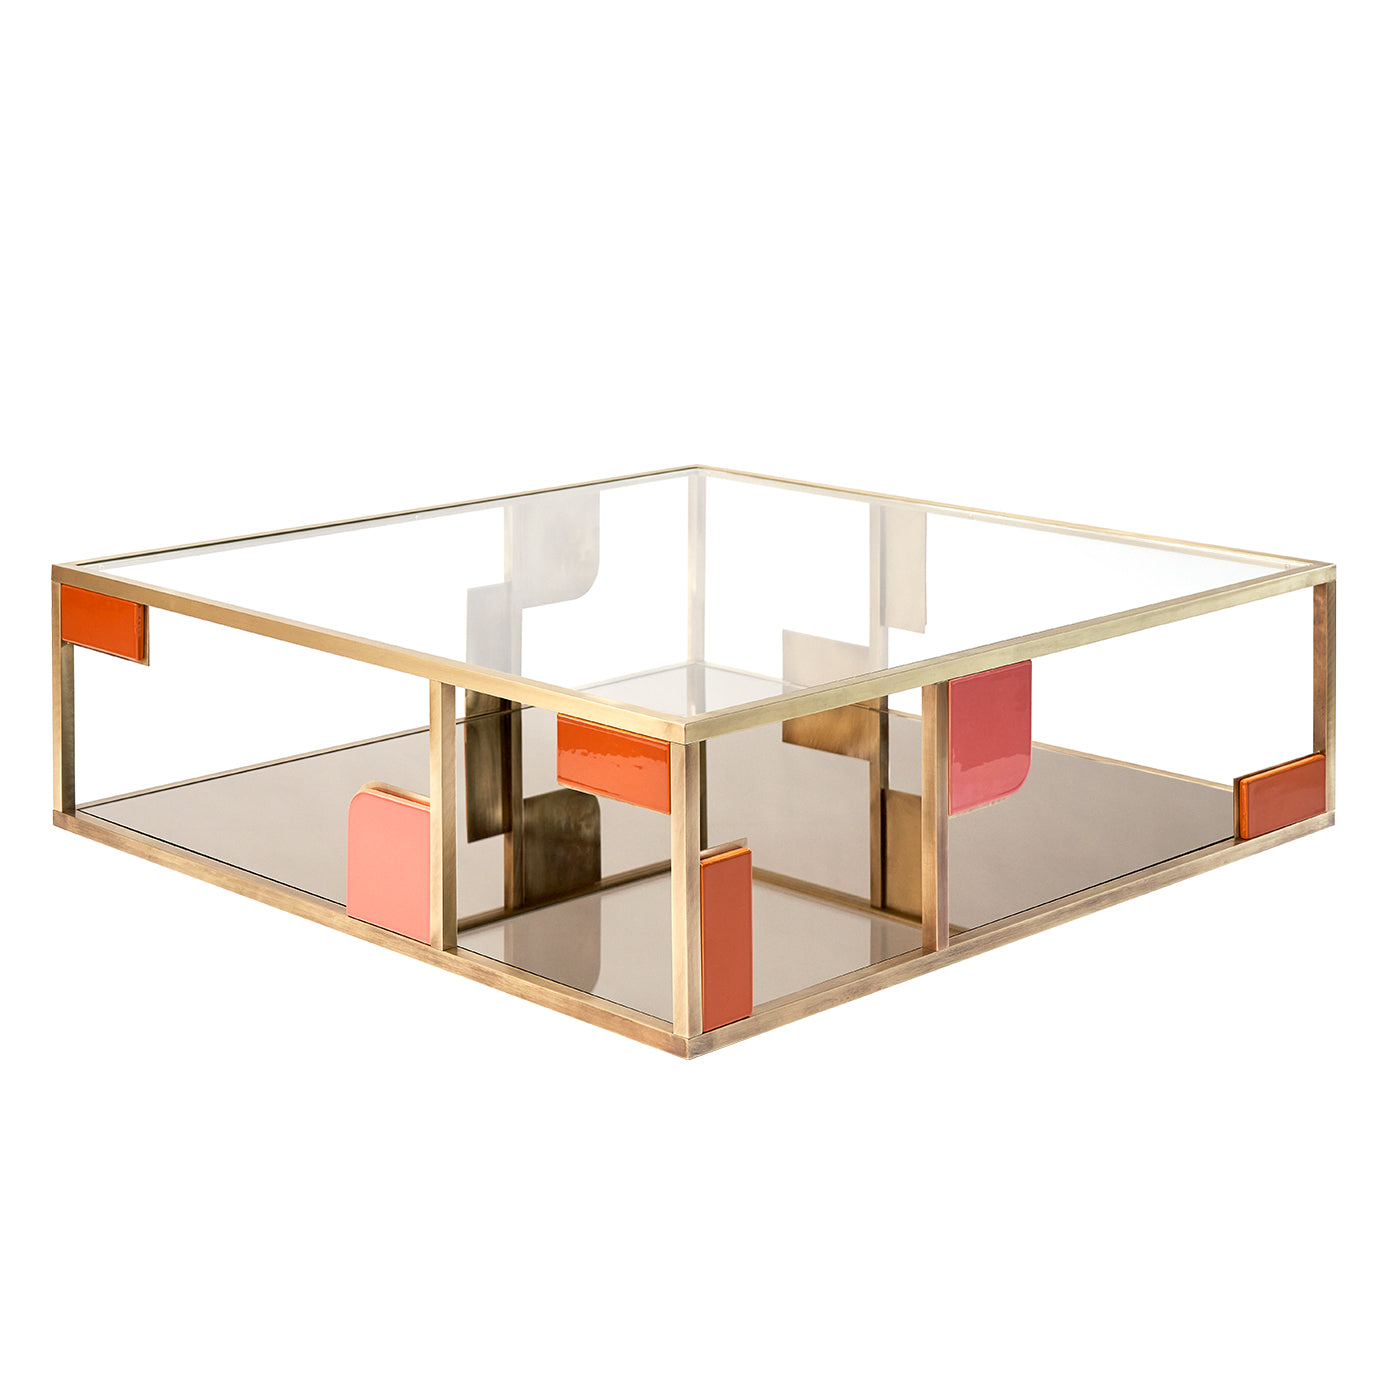 Sunset Square Low Coffee Table  - Alternative view 1